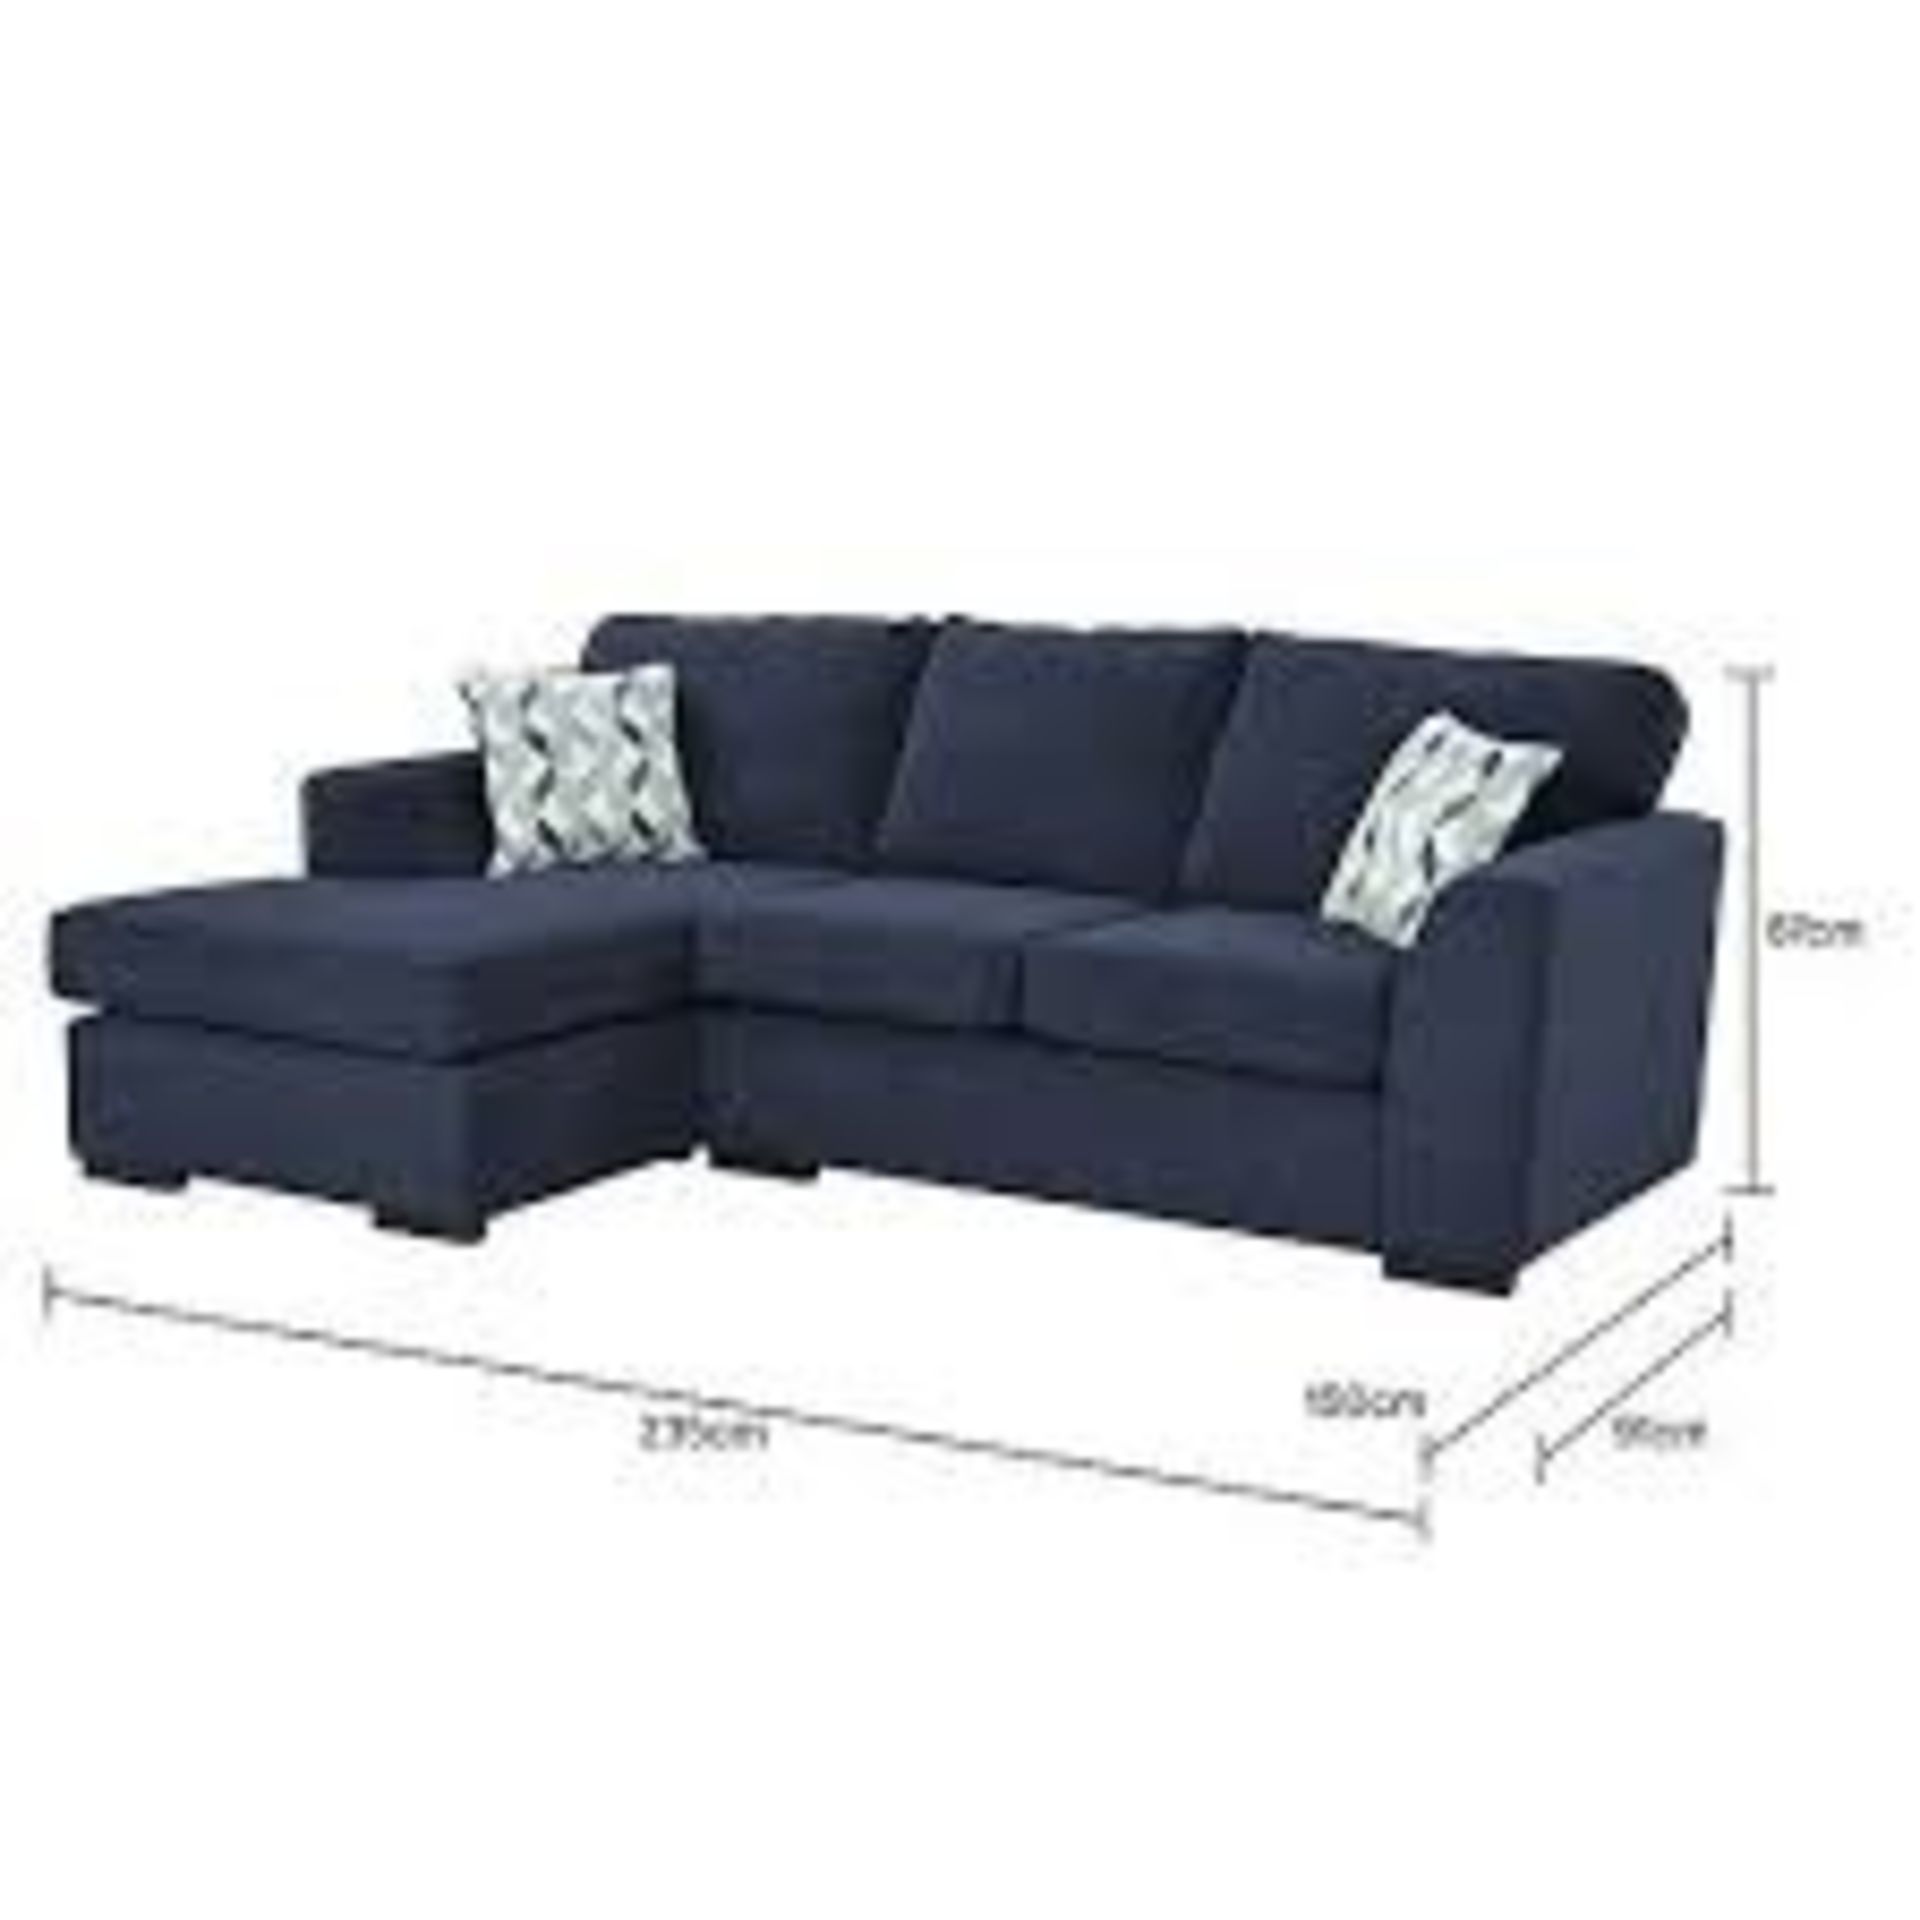 1 BRAND NEW BAGGED BOSTON RIGHT HAND CORNER CHAISE IN NAVY (VIEWING HIGHLY RECOMMENDED)